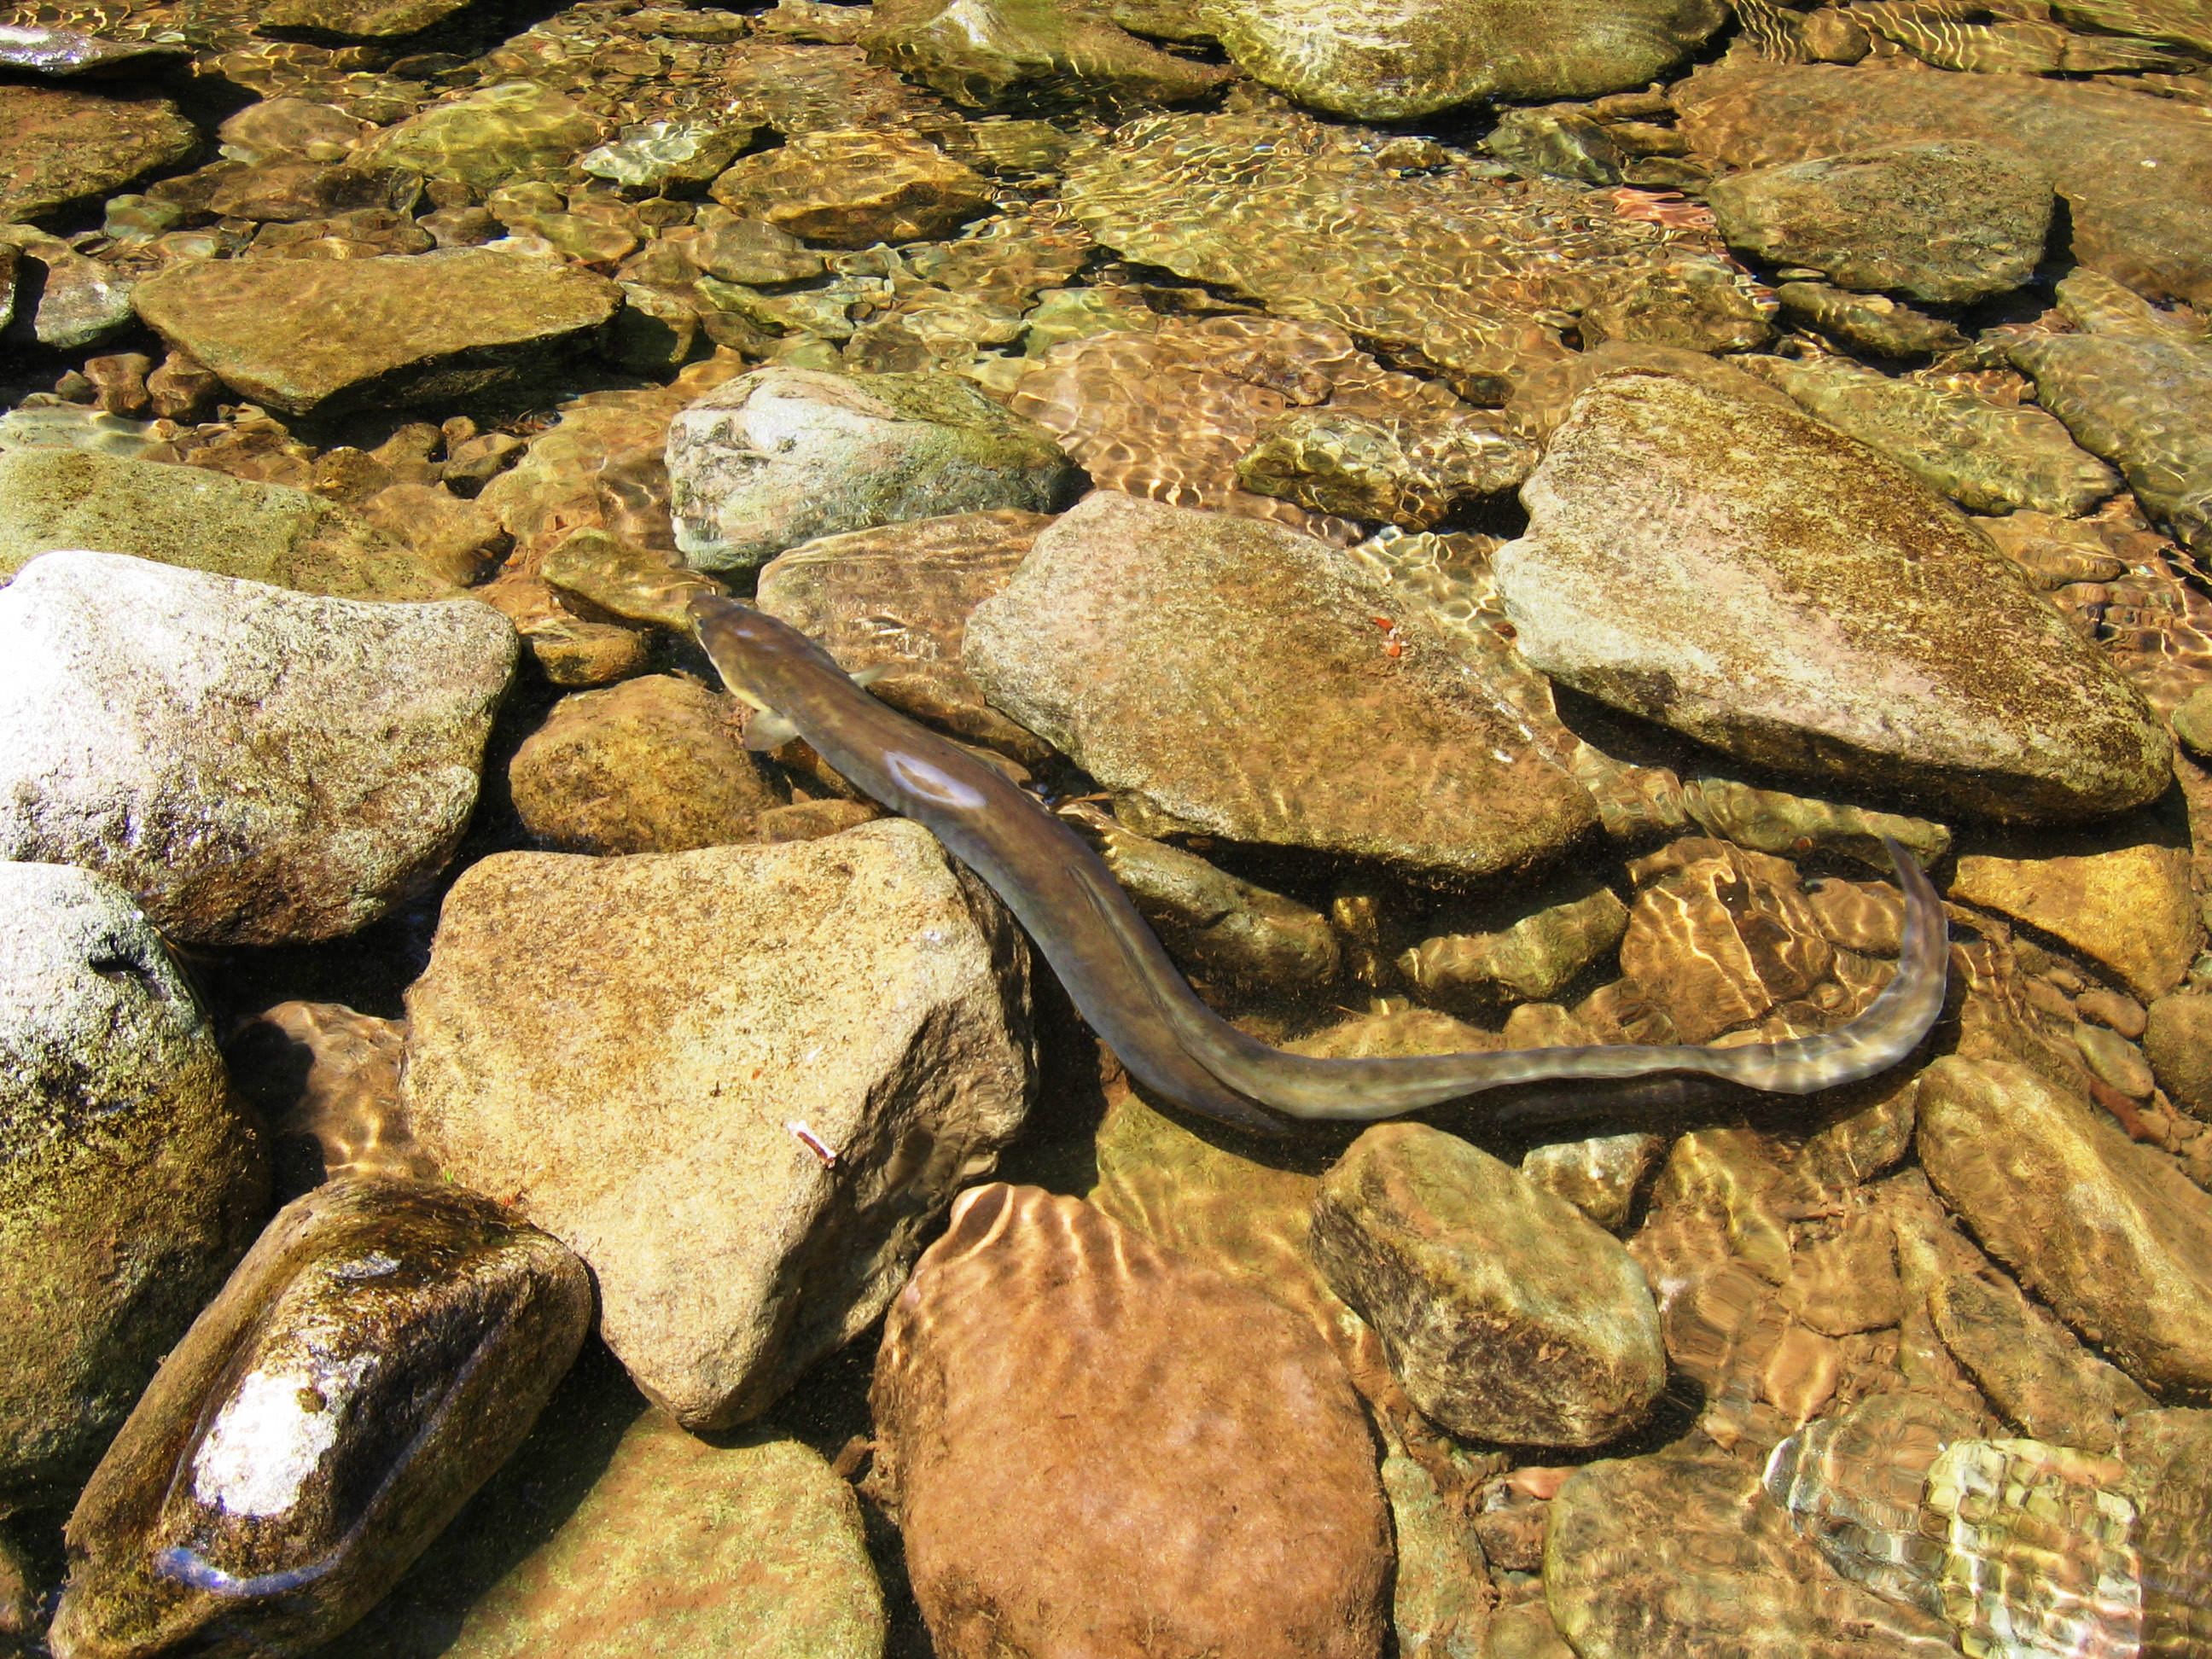 A long eel sits in a shallow body of water.